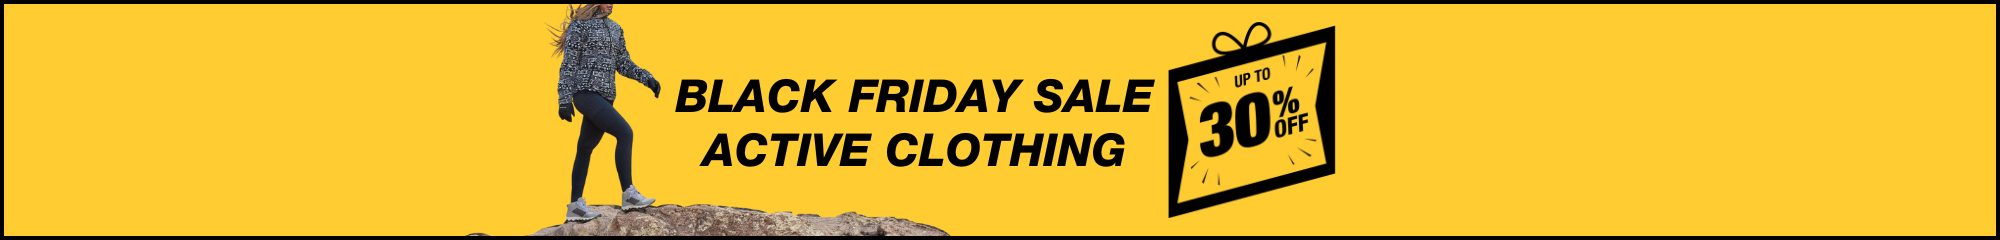 Black Friday Deals on Active Clothing